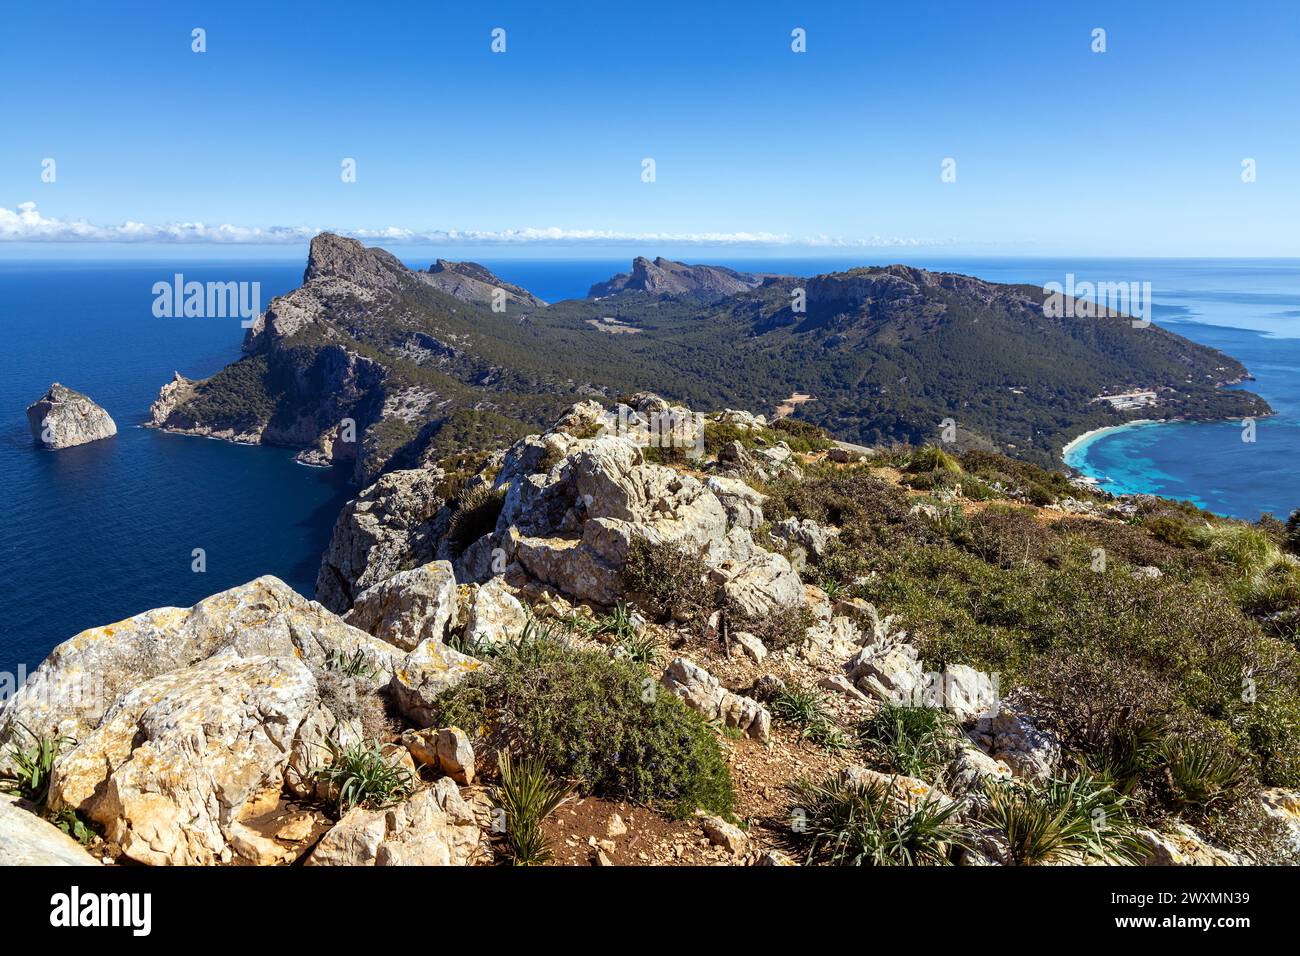 Cap de Formentor (Formentor cape) is located in the Pollença municipality on the northernmost tip of the island of Majorca, Balearic Islands Stock Photo